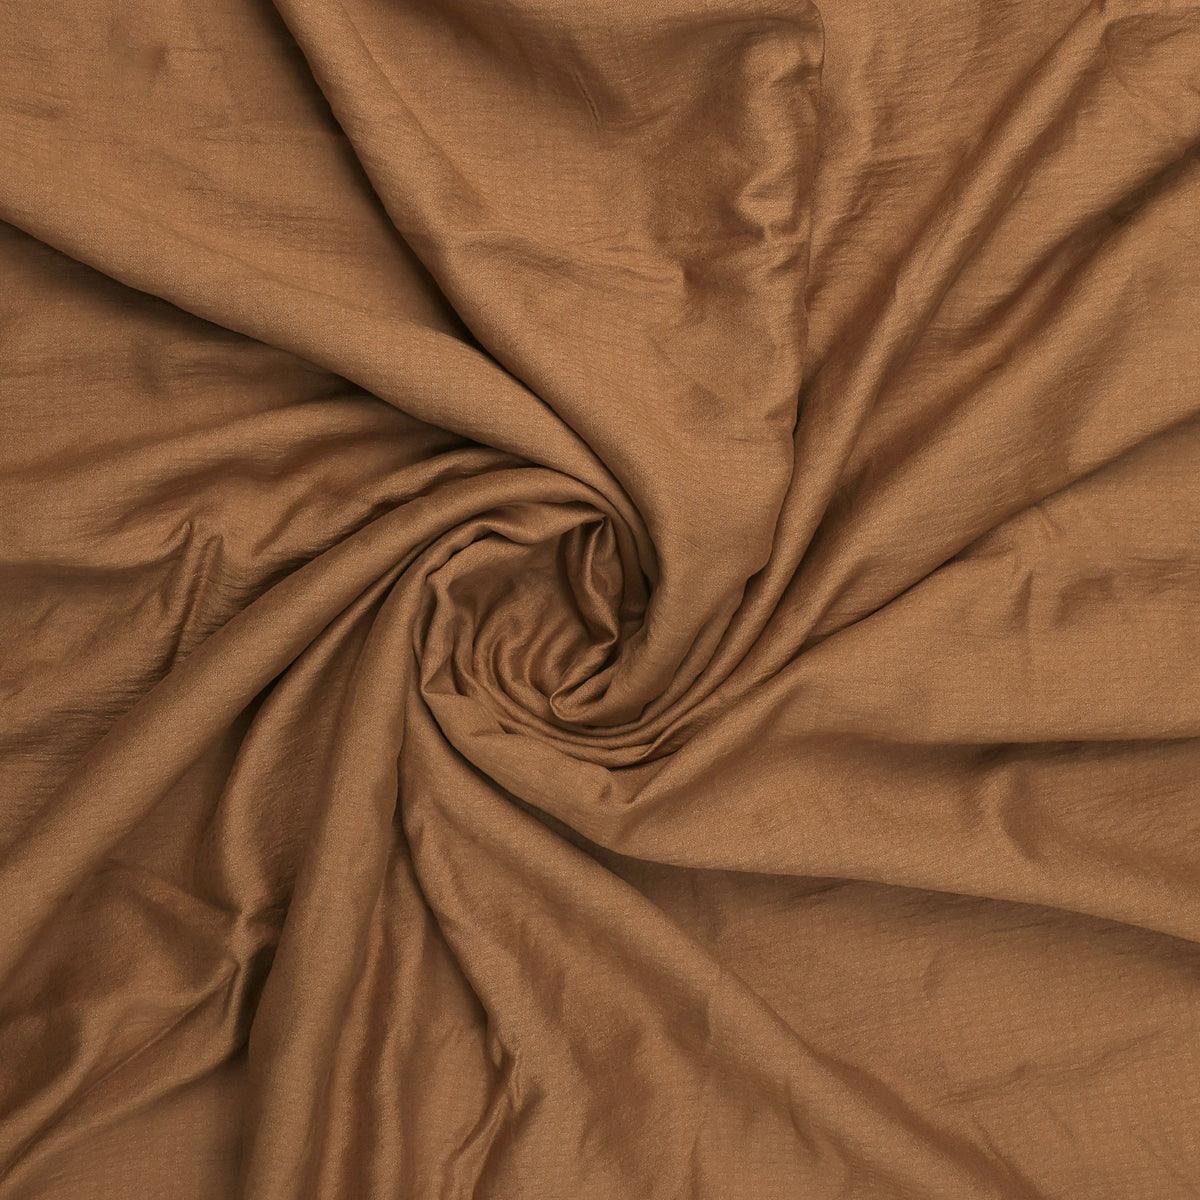 Coffee Colour Self Patterned Dyed Fabric - FAB VOGUE Studio®